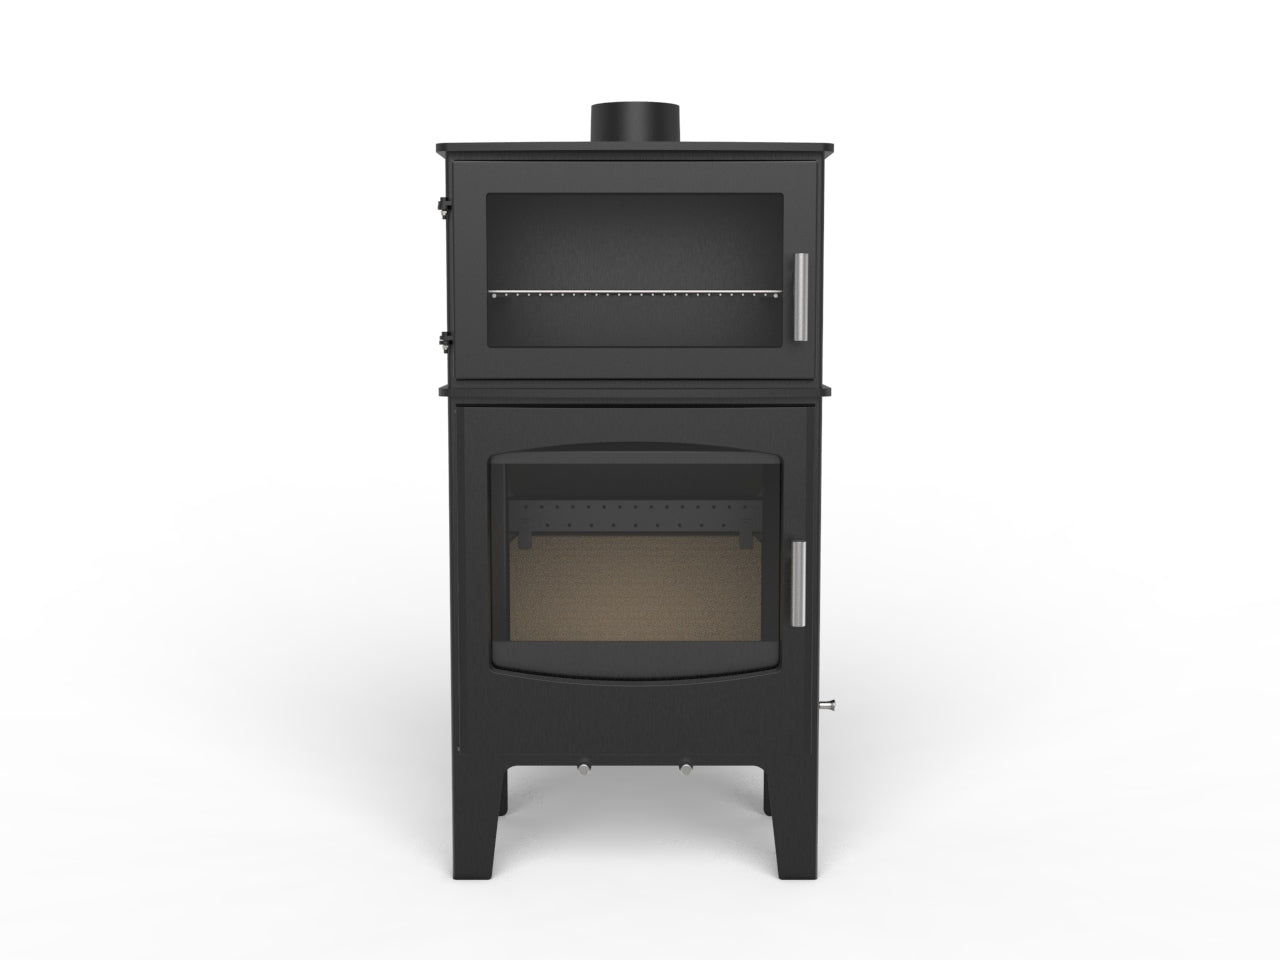 CF805-T Small steel wood stove 8kw External air introduction model Cozy Fire